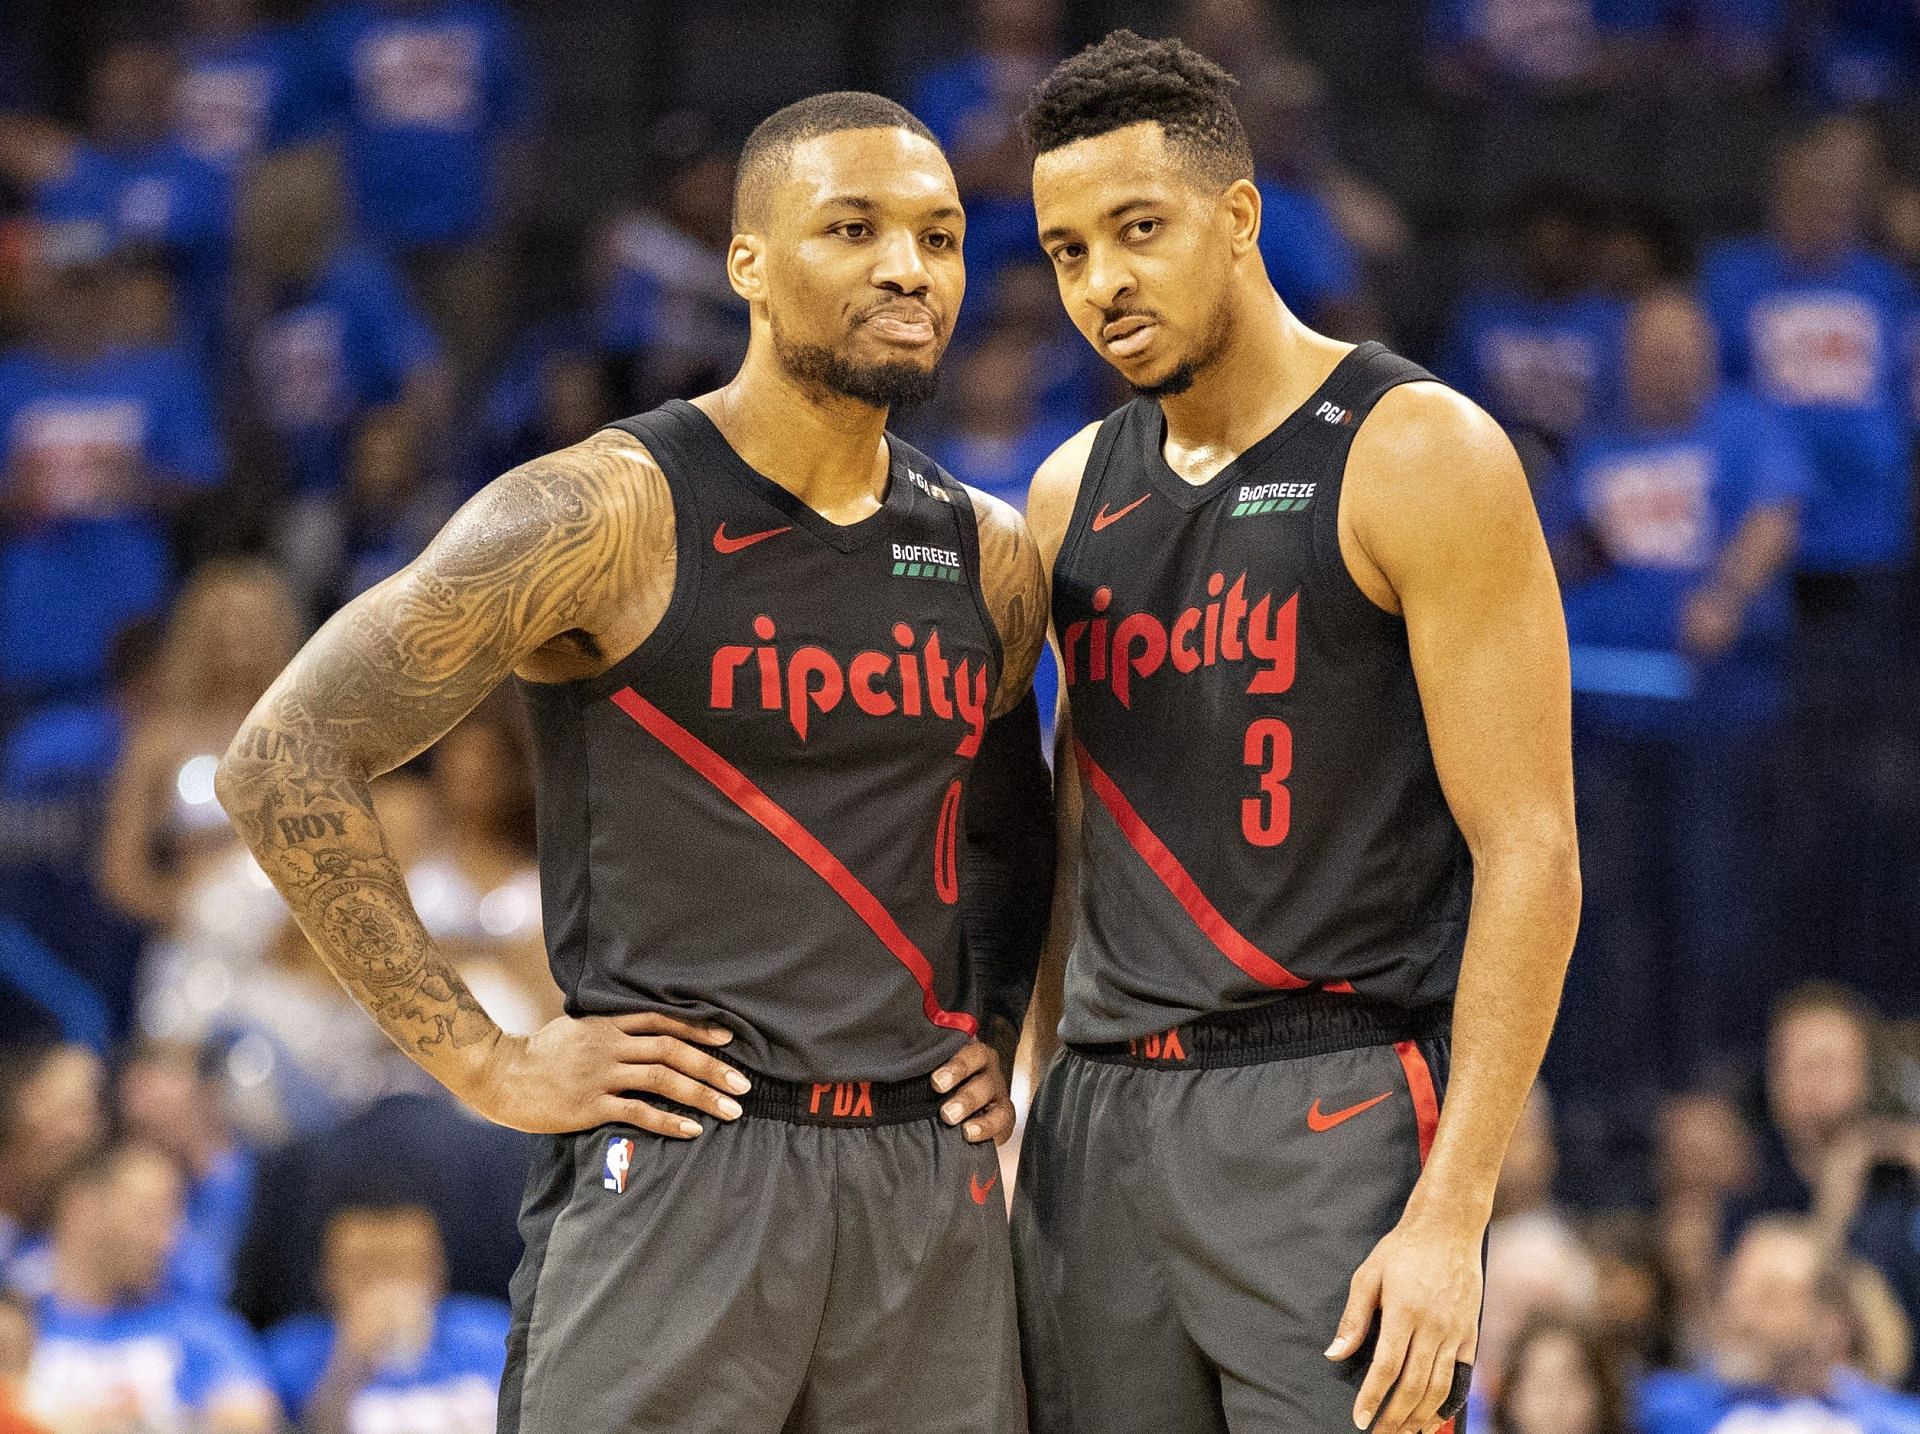 Damian Lillard and the Portland Trail Blazers are off to a wobbly start in the 2021-22 NBA season